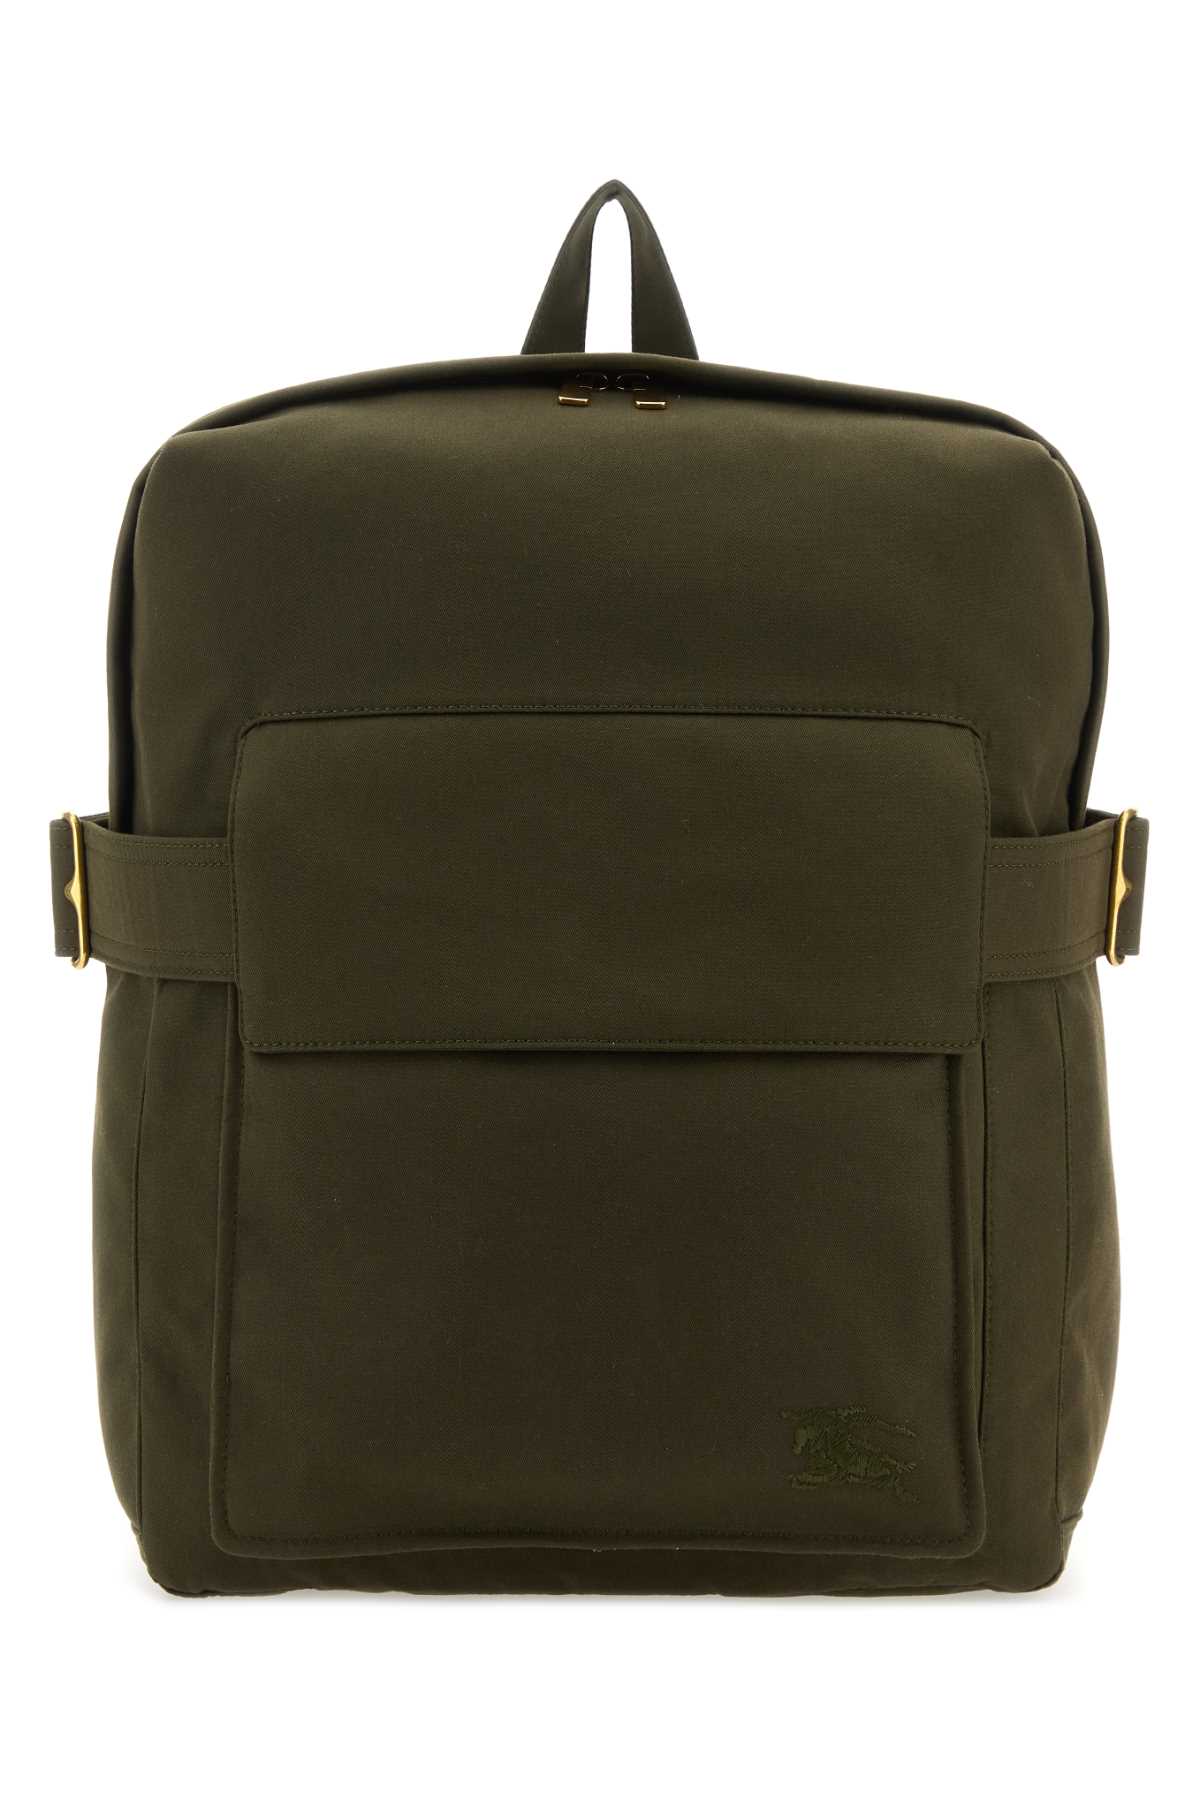 Burberry Army Green Polyester Blend Trench Backpack